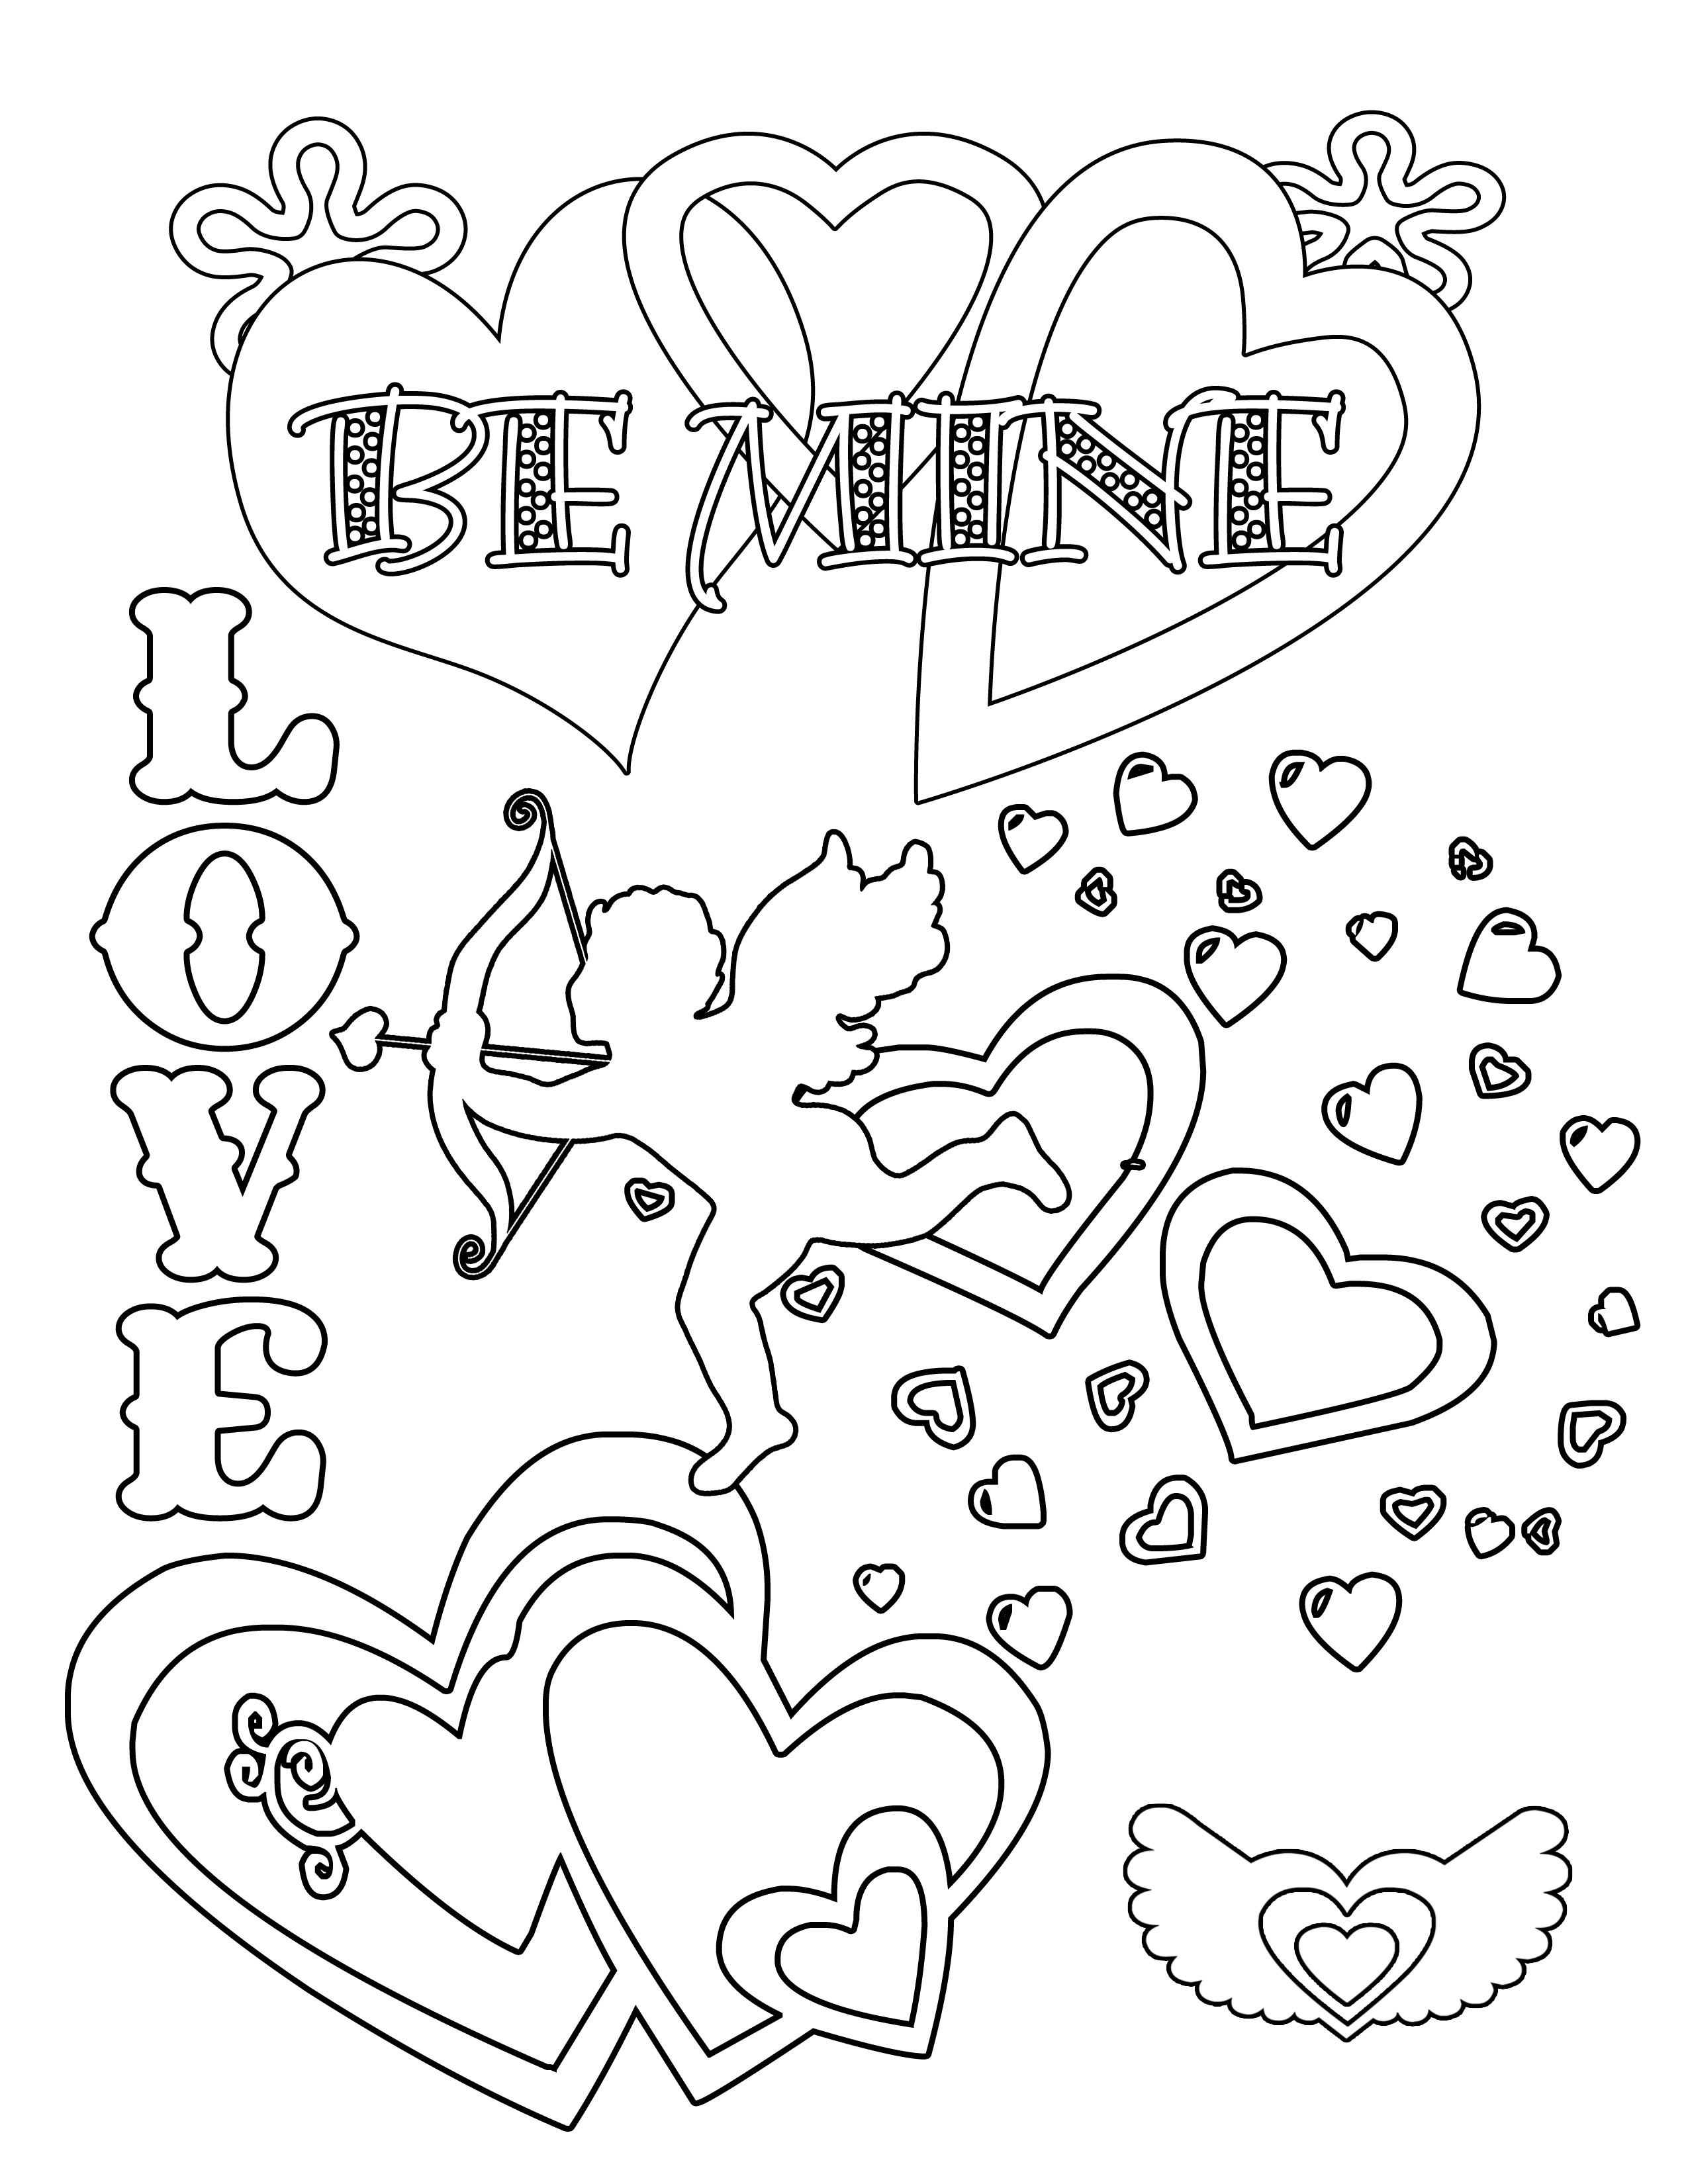 Printable Valentines Day Coloring Pages
 Party Simplicity Free Valentines Day Coloring Pages and